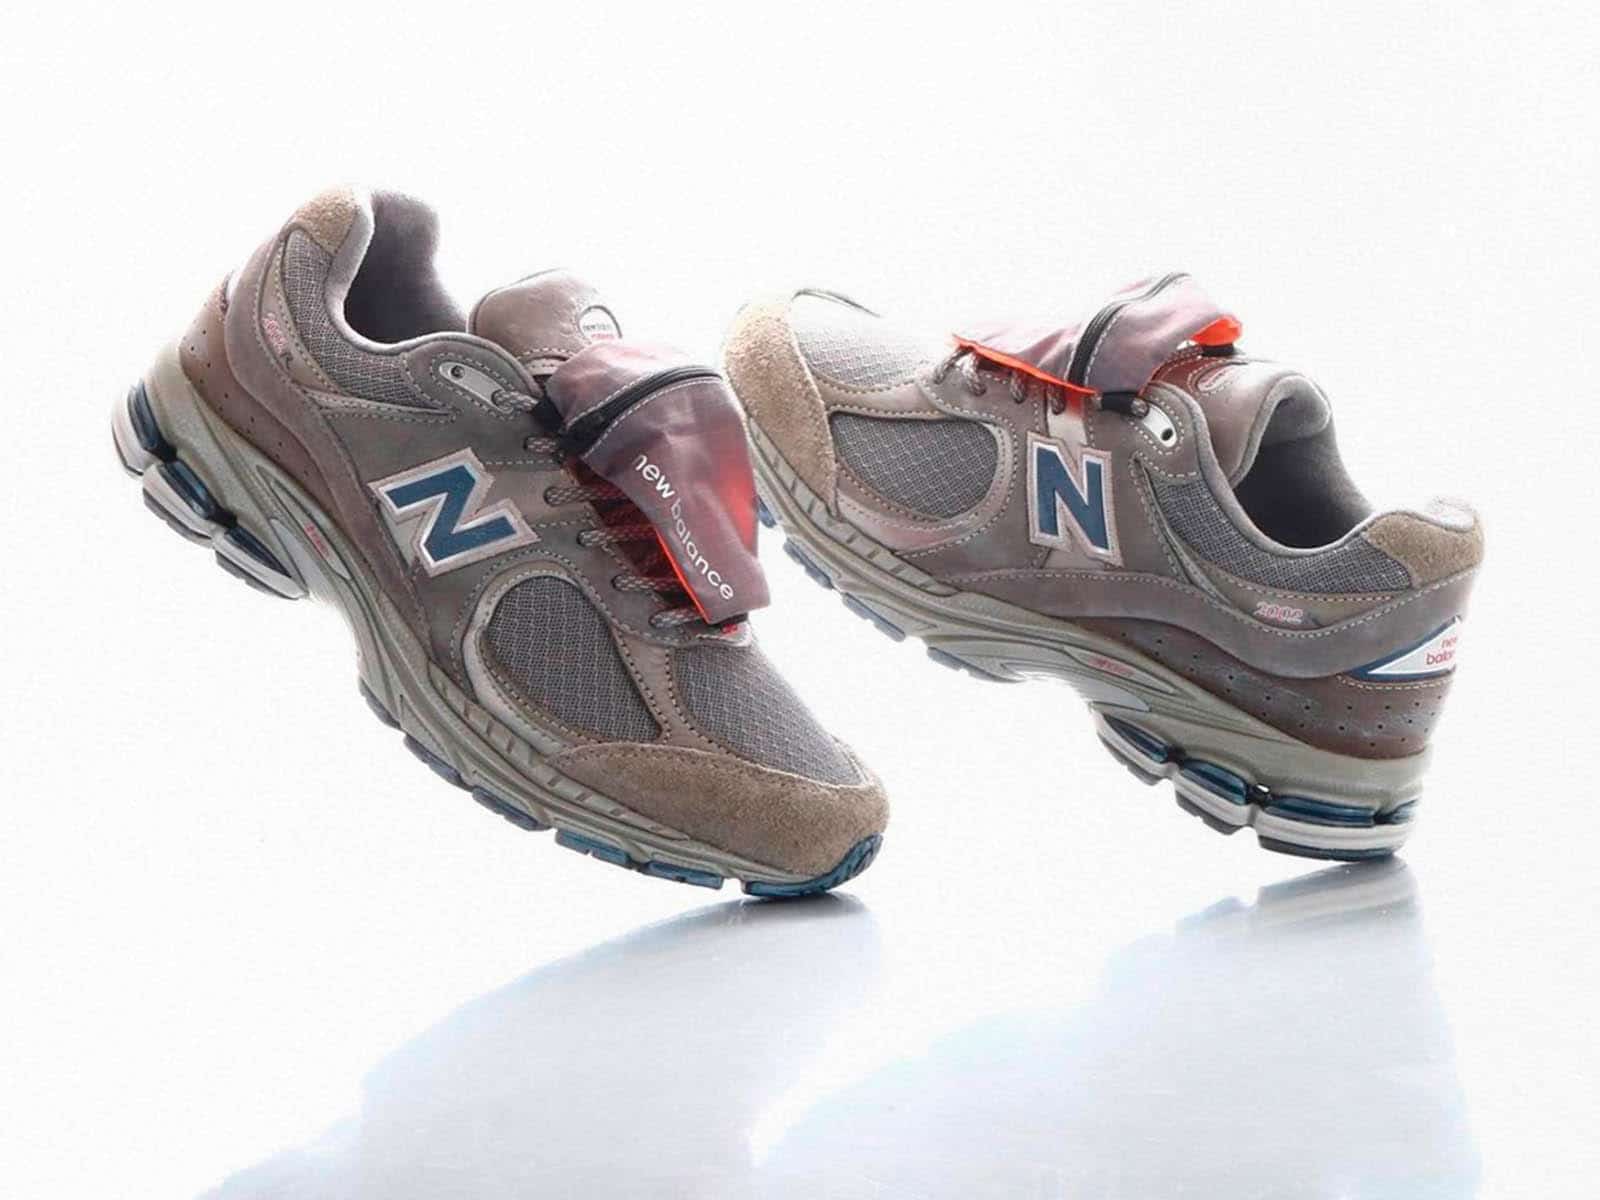 The new New Balance 2002R features technical pockets